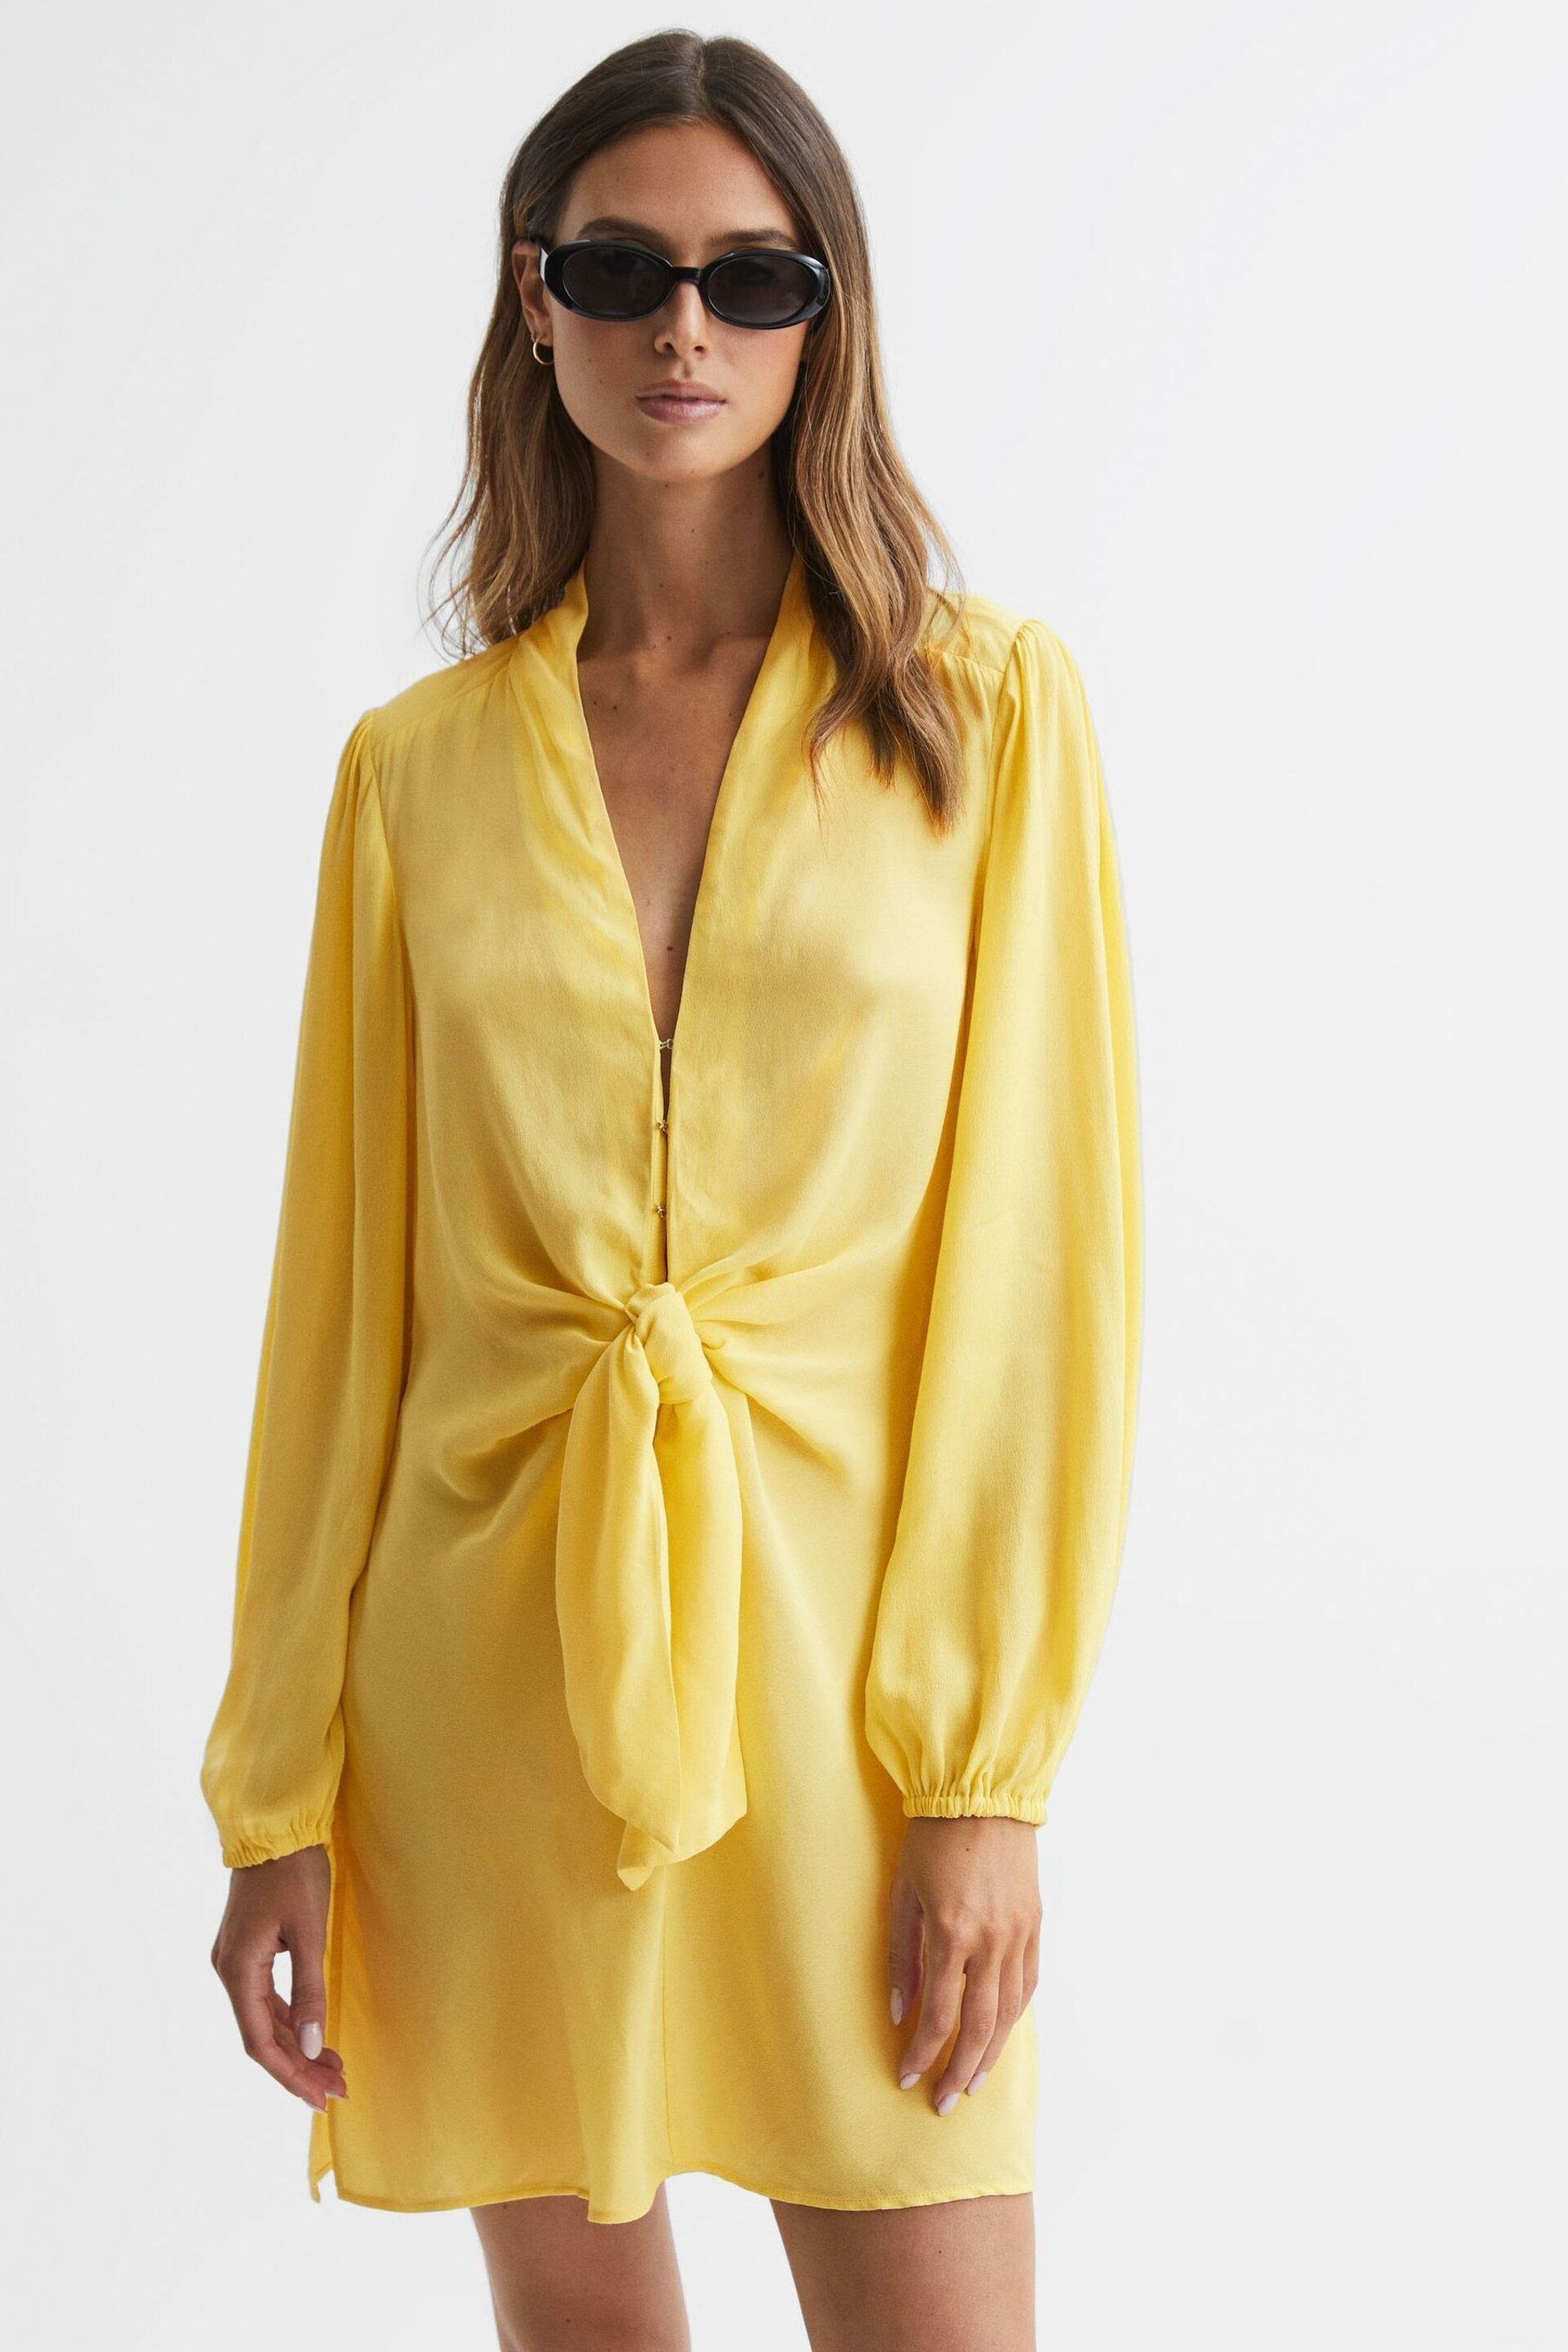 Reiss Yellow Mabel Tie Front Mini Dress - Image 1 of 5